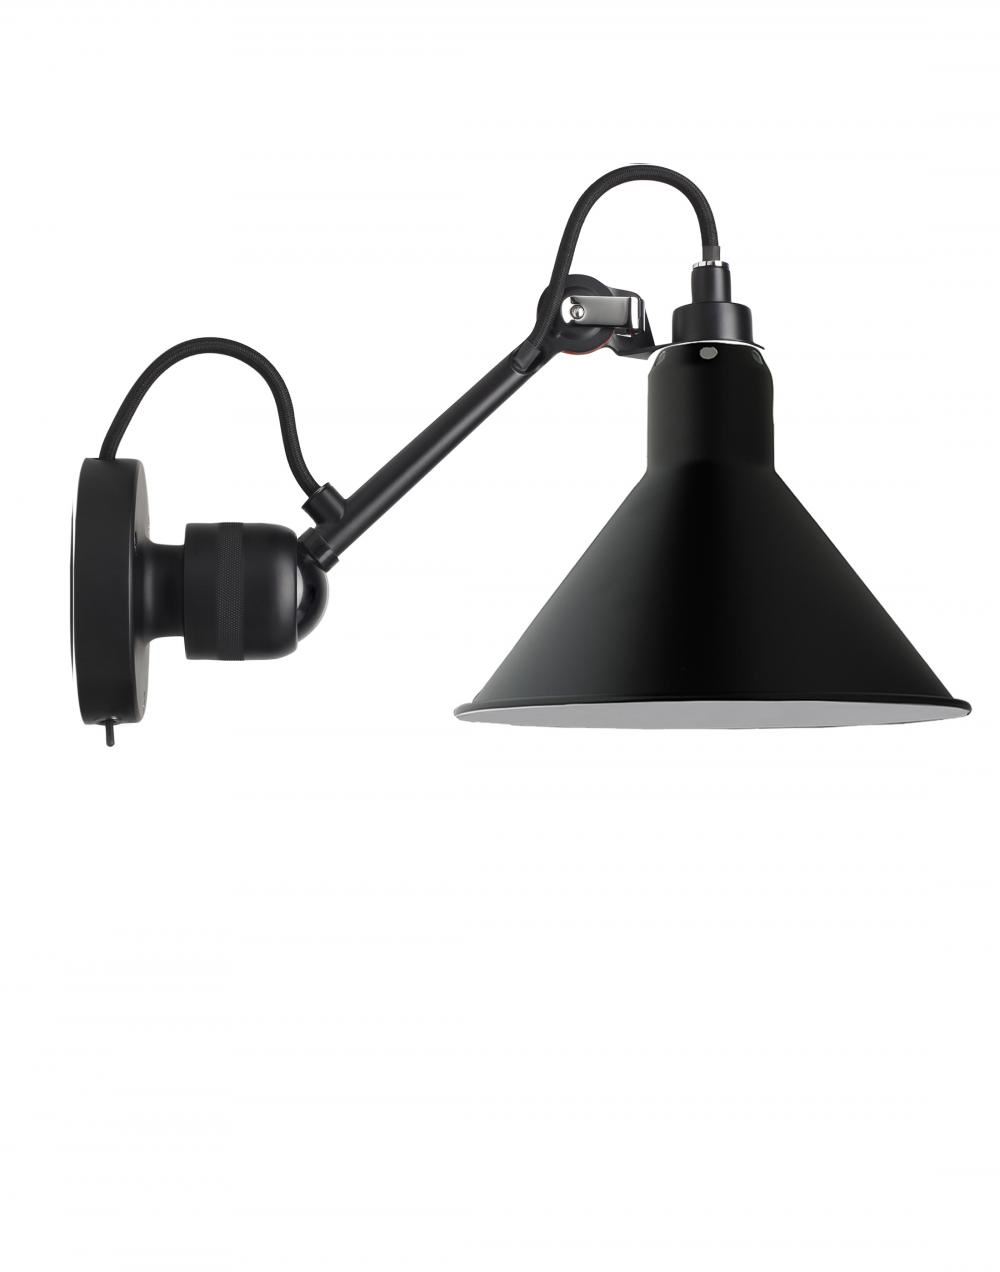 Lampe Gras 304 Small Wall Light Black Arm Black Shade Conic Integral Switch